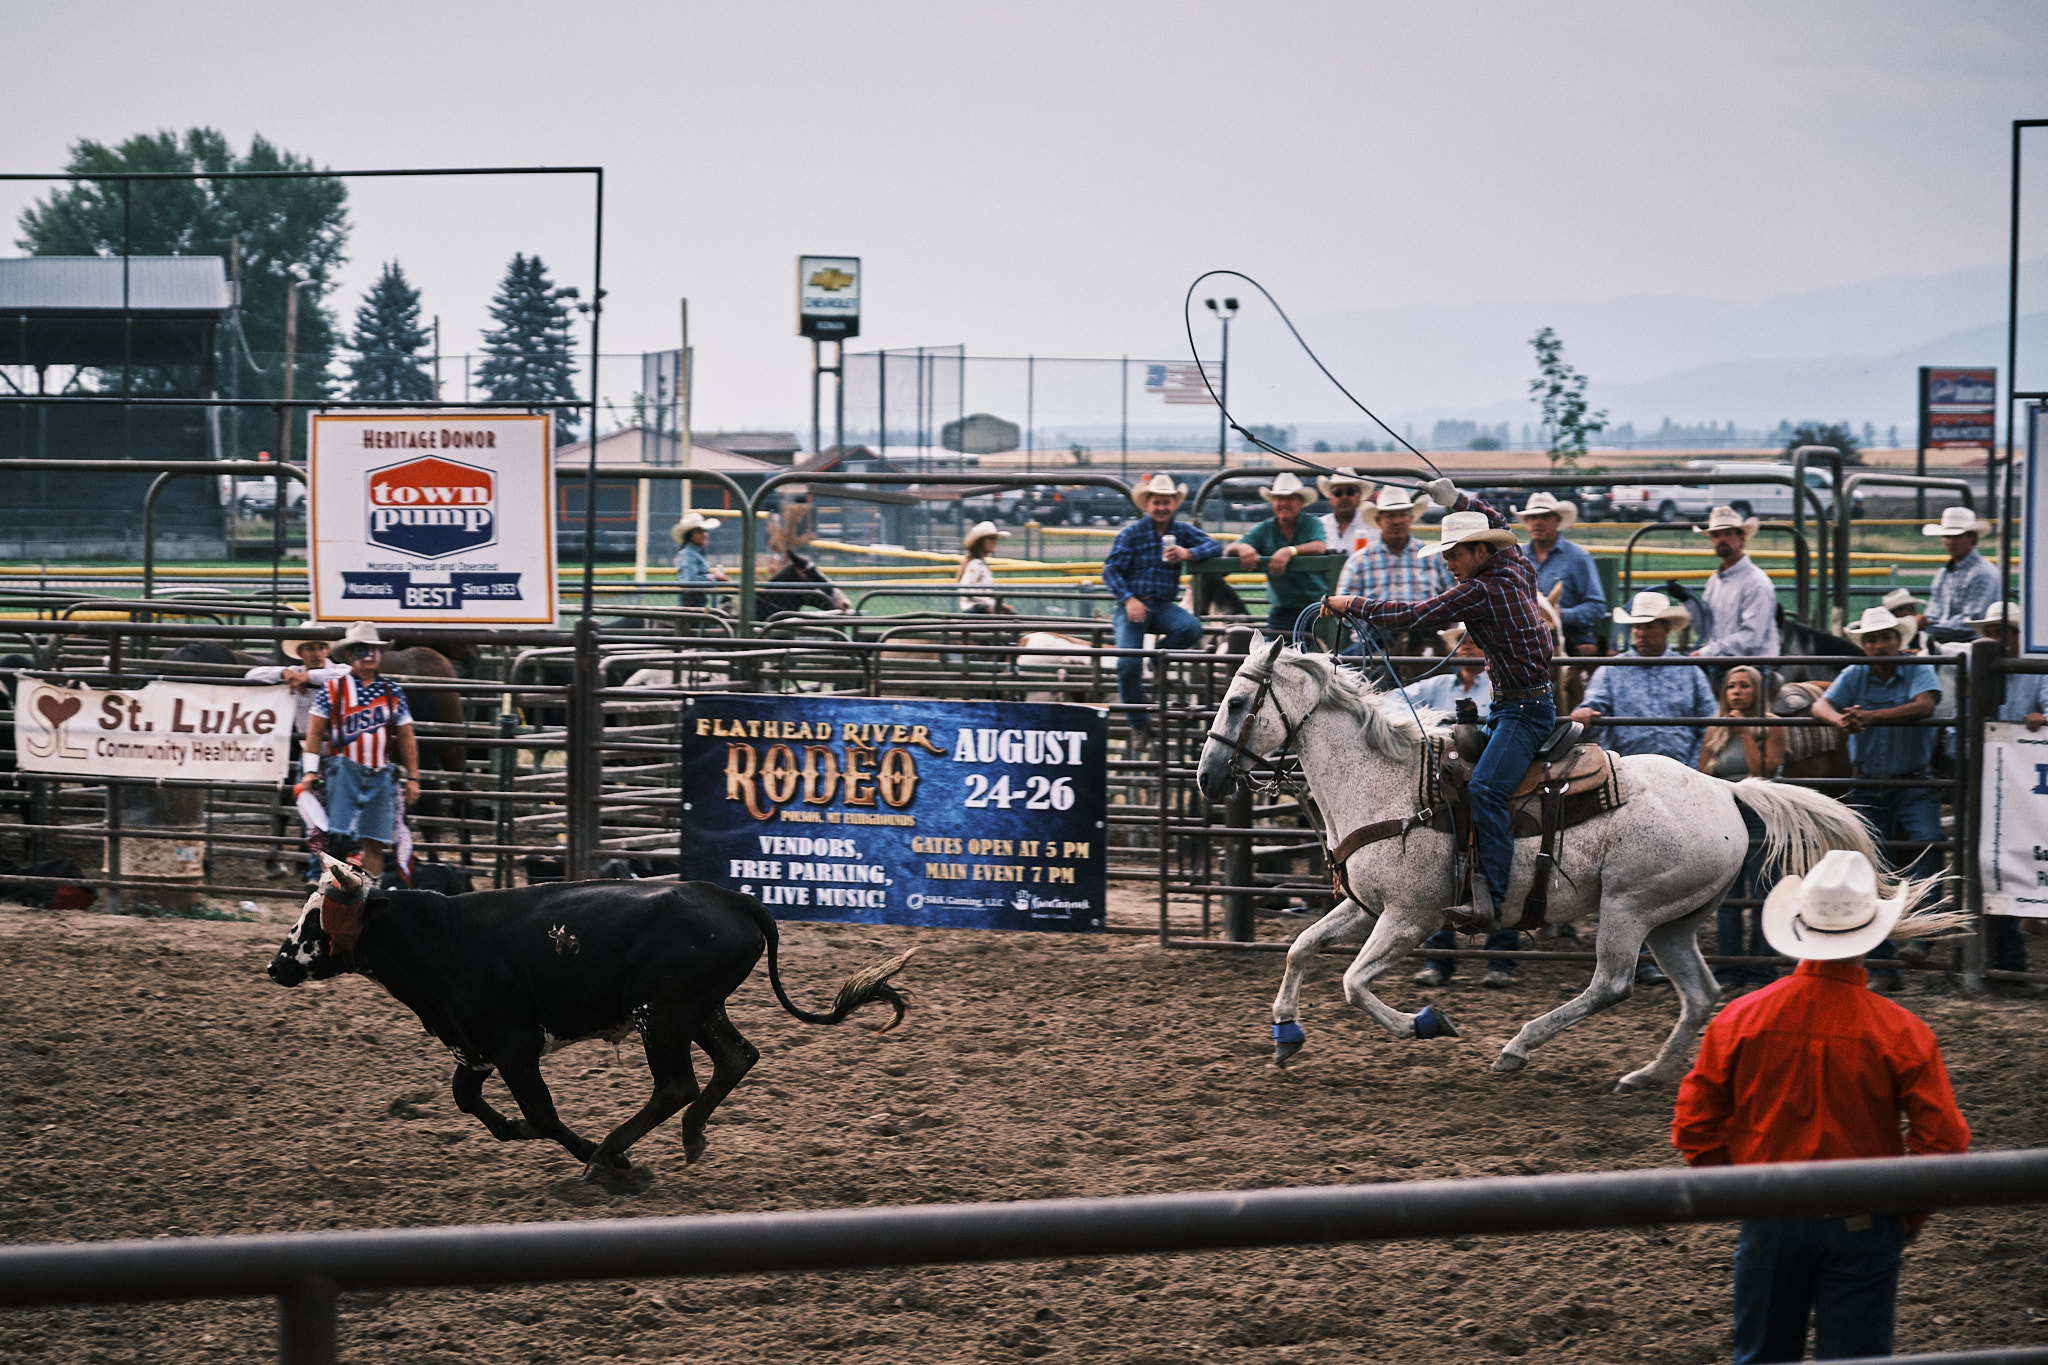 Cowboy on his horse whipping a lasso in the air as he chases a bull